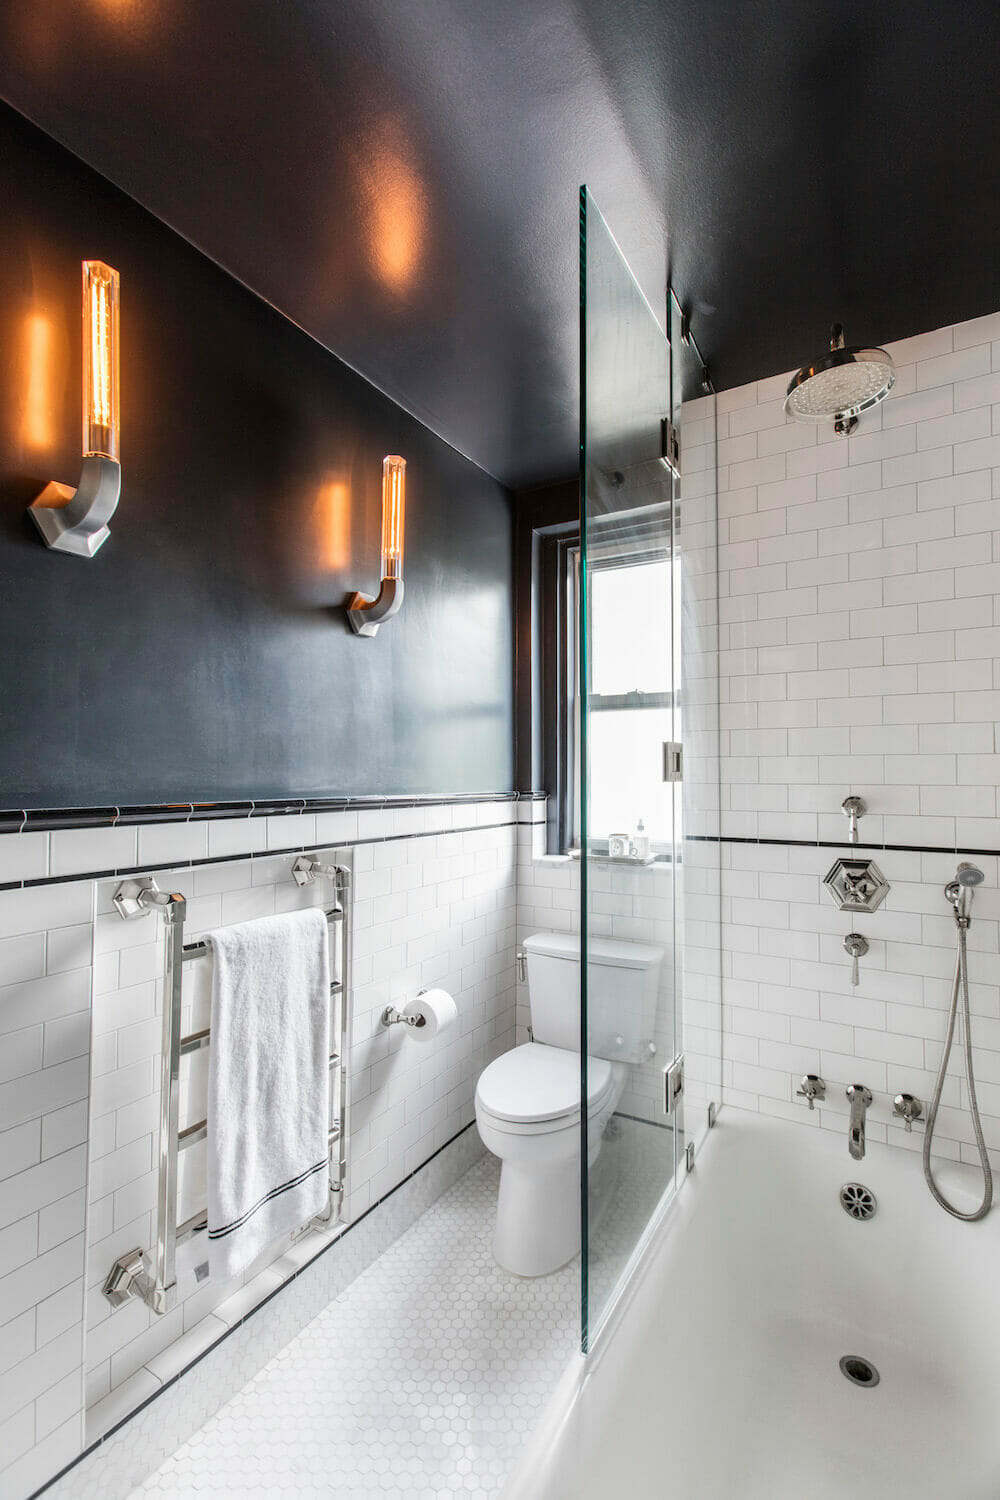 Image of renovated bathroom with towel warmer, subway tile and black accent walls